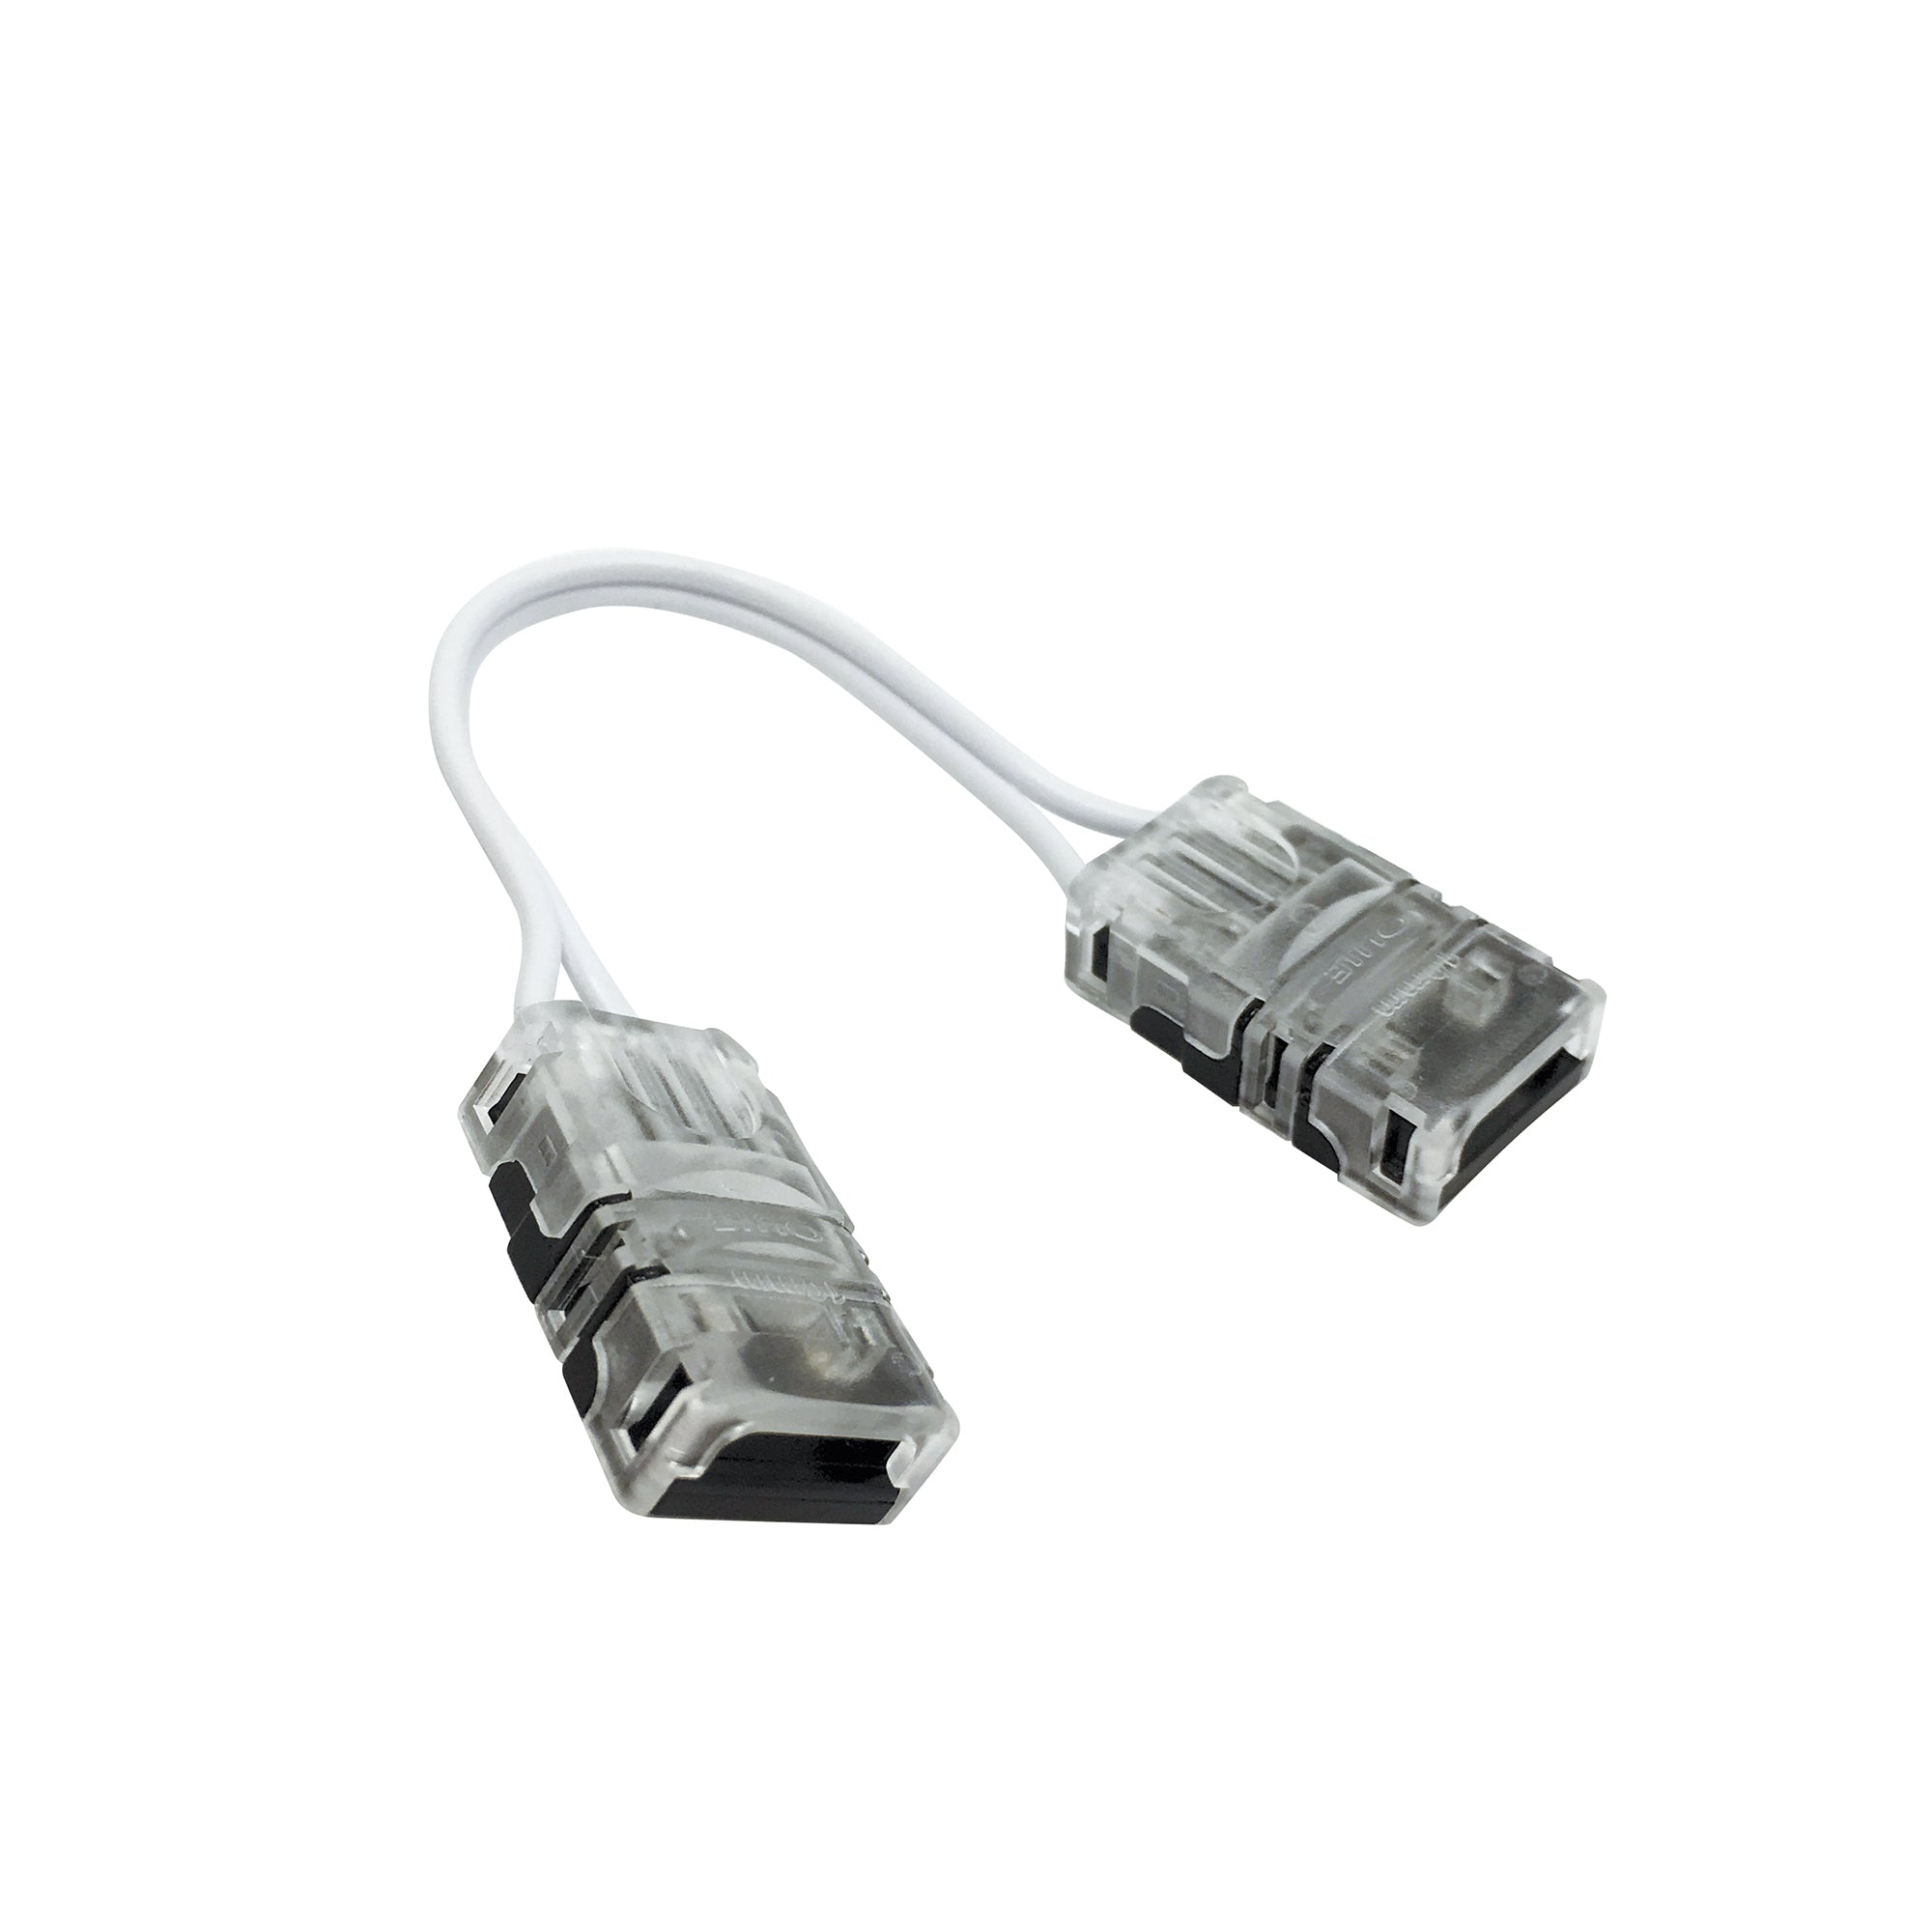 Nora Lighting NATLCD-206 6" Interconnection Cable For NUTP12 Comfort Dim Tape Light - White